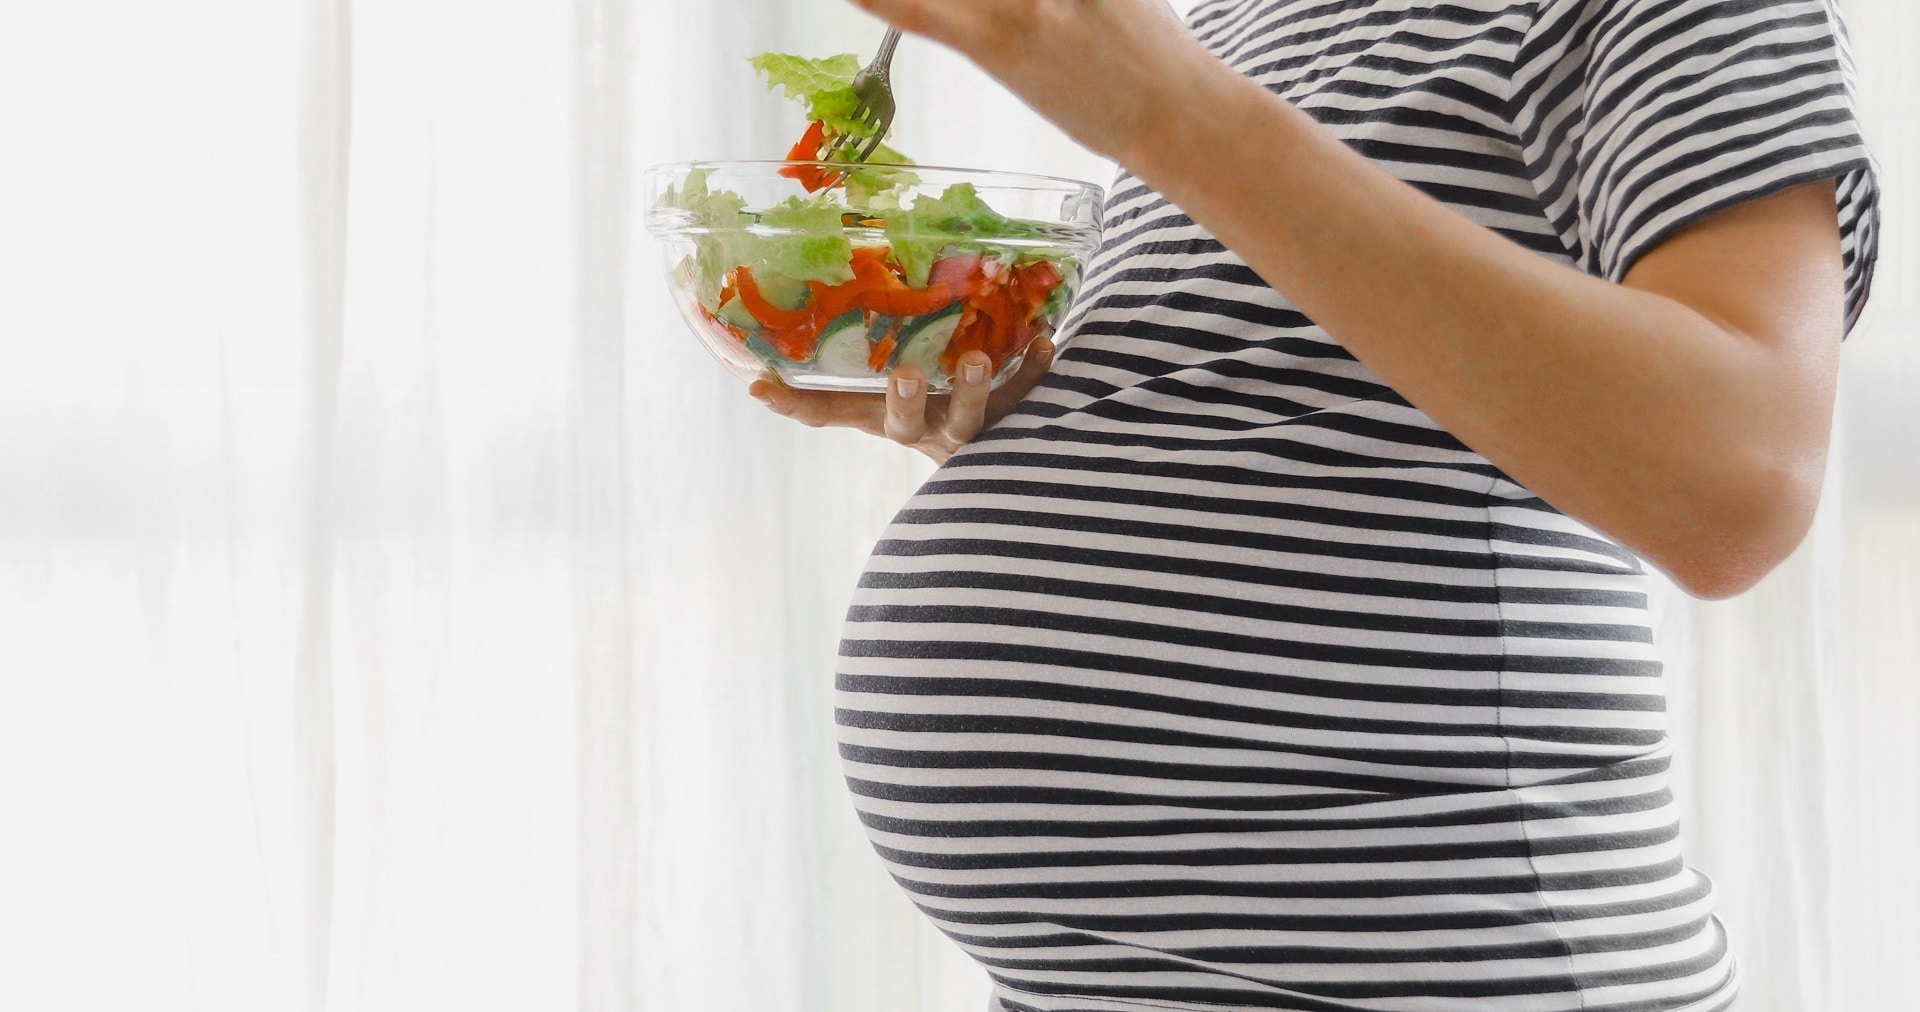 Why Should Pregnant Women Take Folic Acid - Gynaecologist Busts Indian Diet Myths in Pregnancy